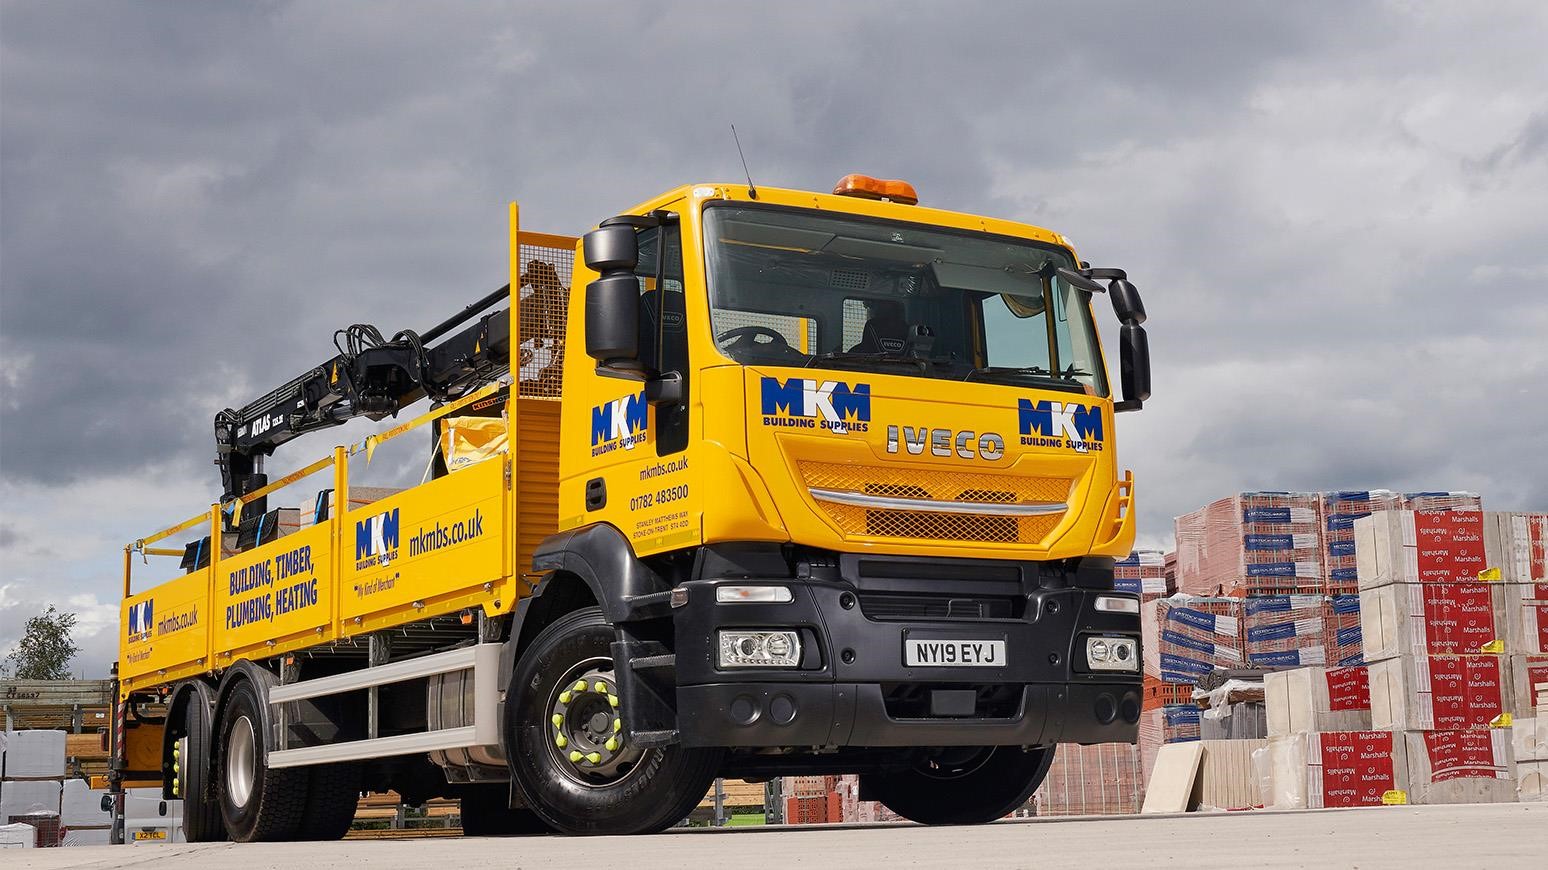 IVECO Sells 10 Stralis X-WAY Trucks to MKM Building Supplies